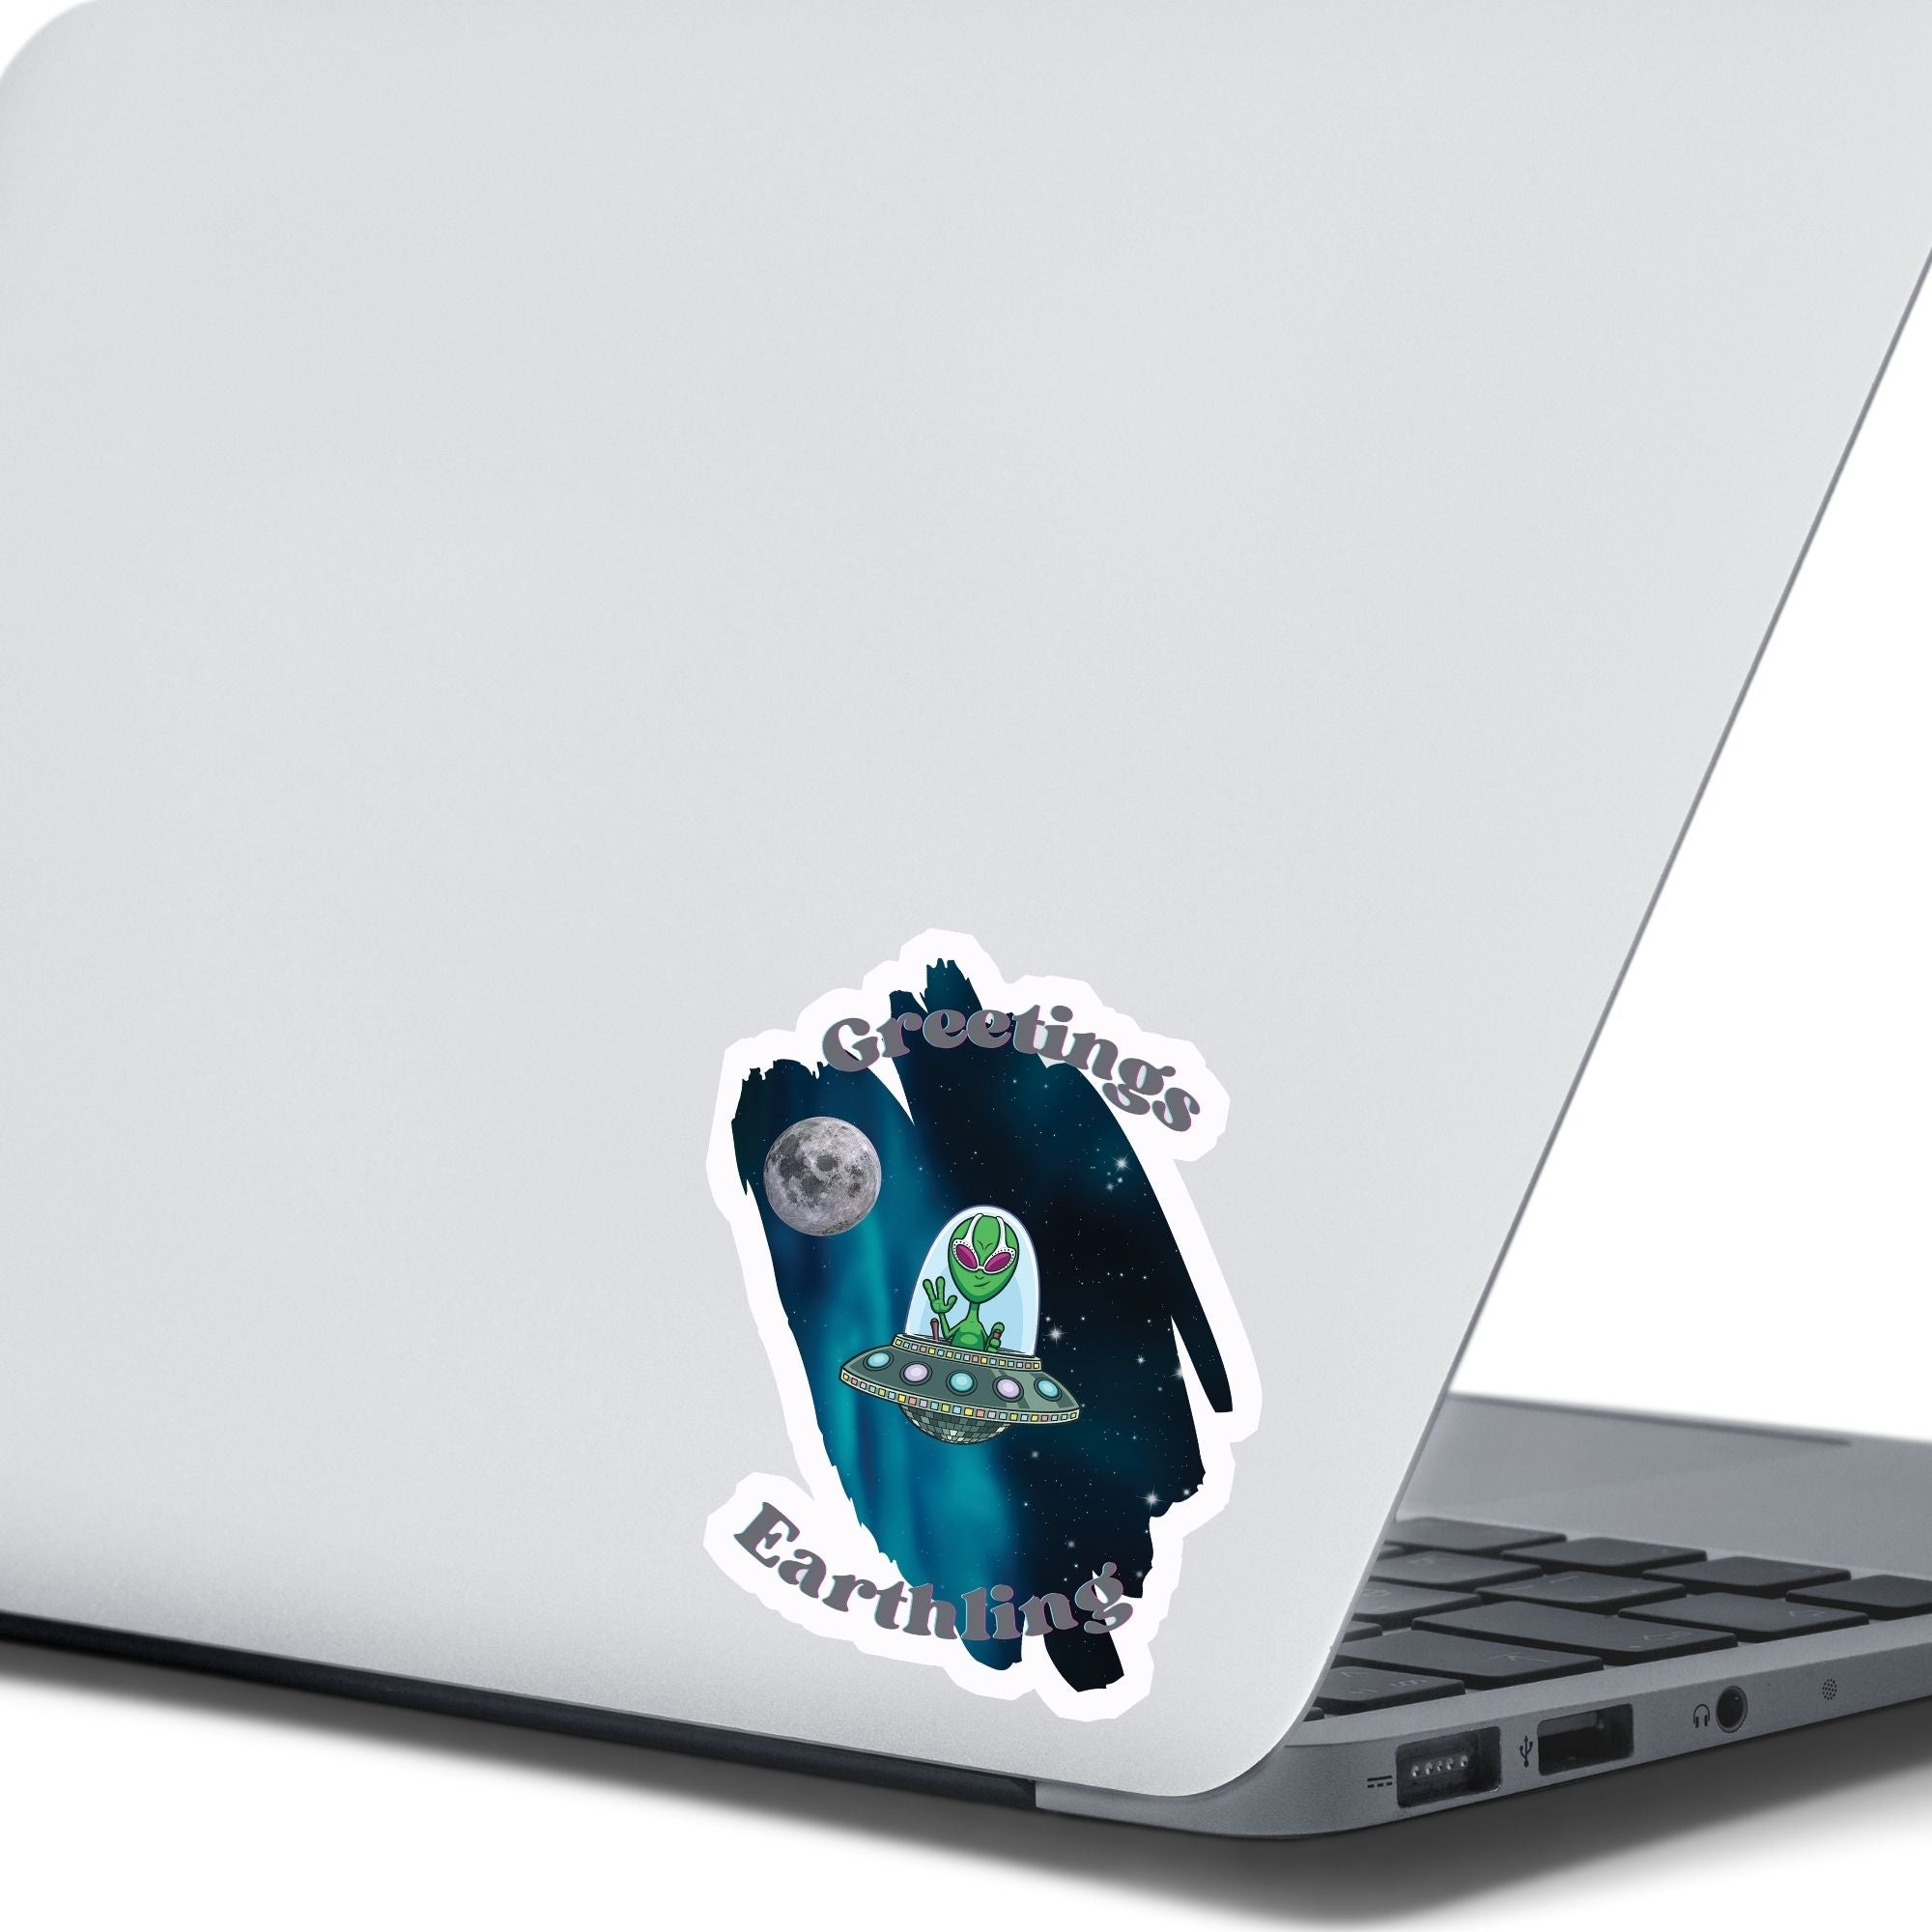 Welcome space aliens! This individual die-cut sticker features a friendly green space alien in a flying saucer, on a background of stars with the moon behind, and the words "Greetings Earthling". This image shows the flying saucer sticker on the back of an open laptop.